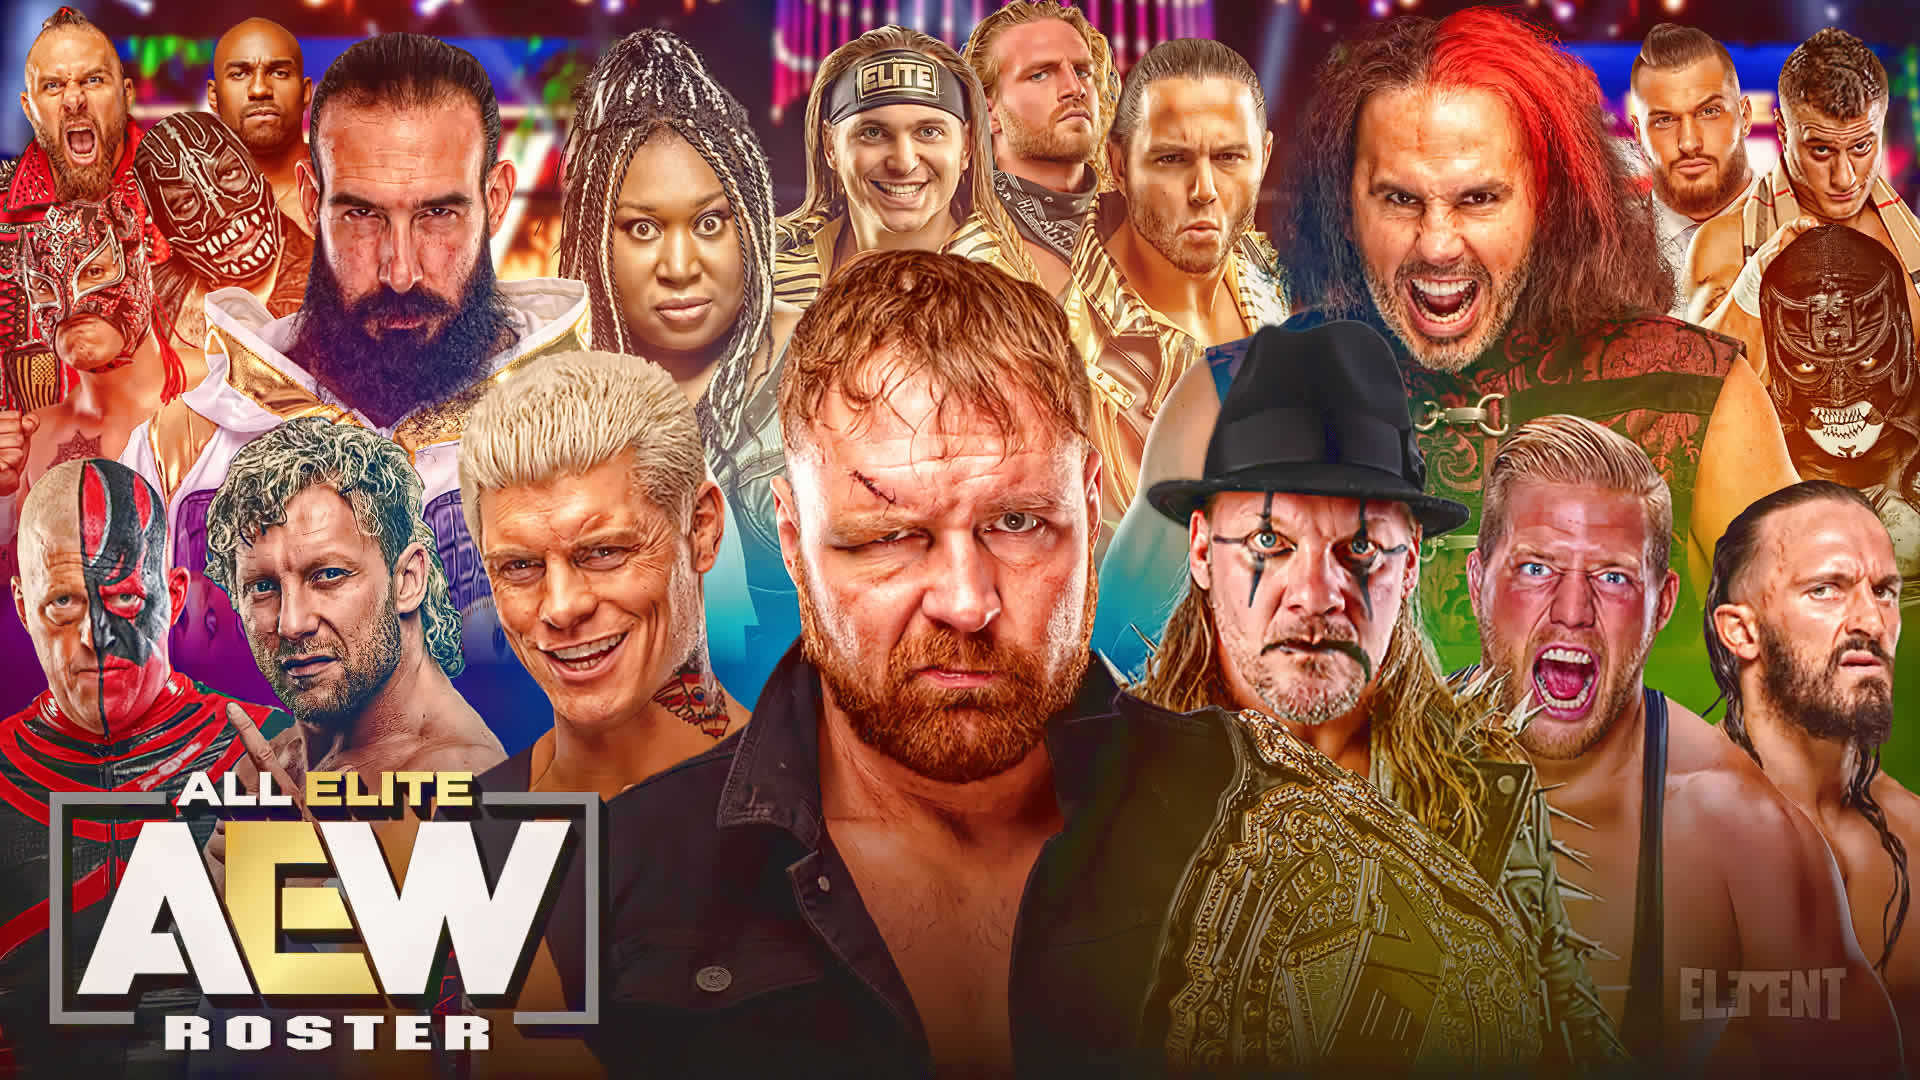 Every AEW Wrestler AEW Wrestling Official Roster 2020 • ElementGames